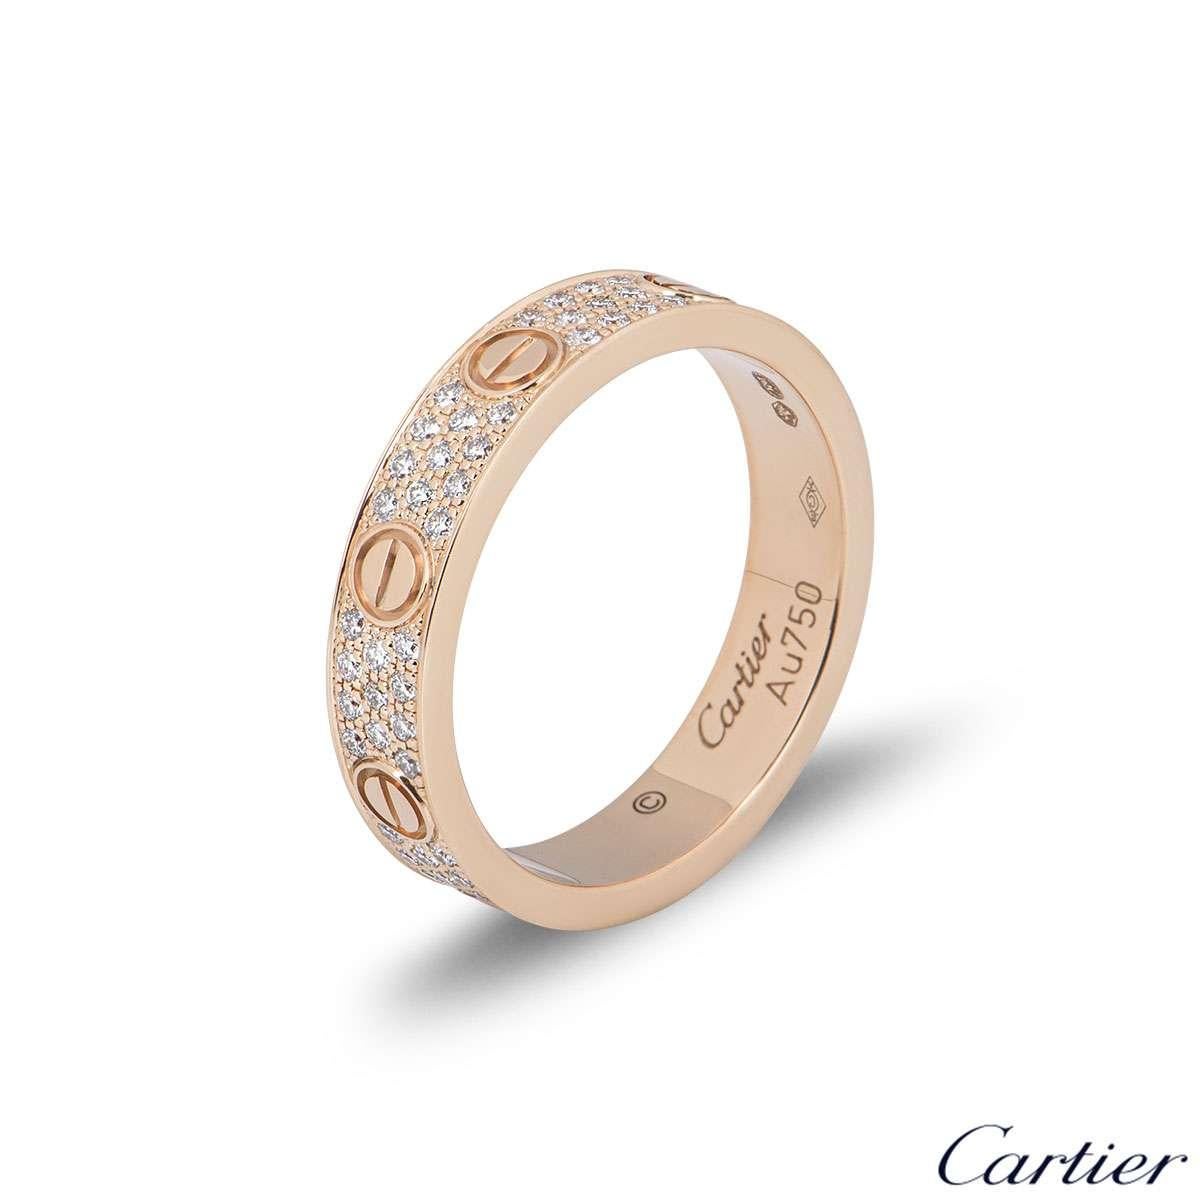 An 18k rose gold Cartier diamond pave ring from the Love collection. The ring comprises of the iconic screw motifs displayed around the outer edges with 88 round brilliant cut diamonds totalling 0.31ct set between each screw motif. The ring measures